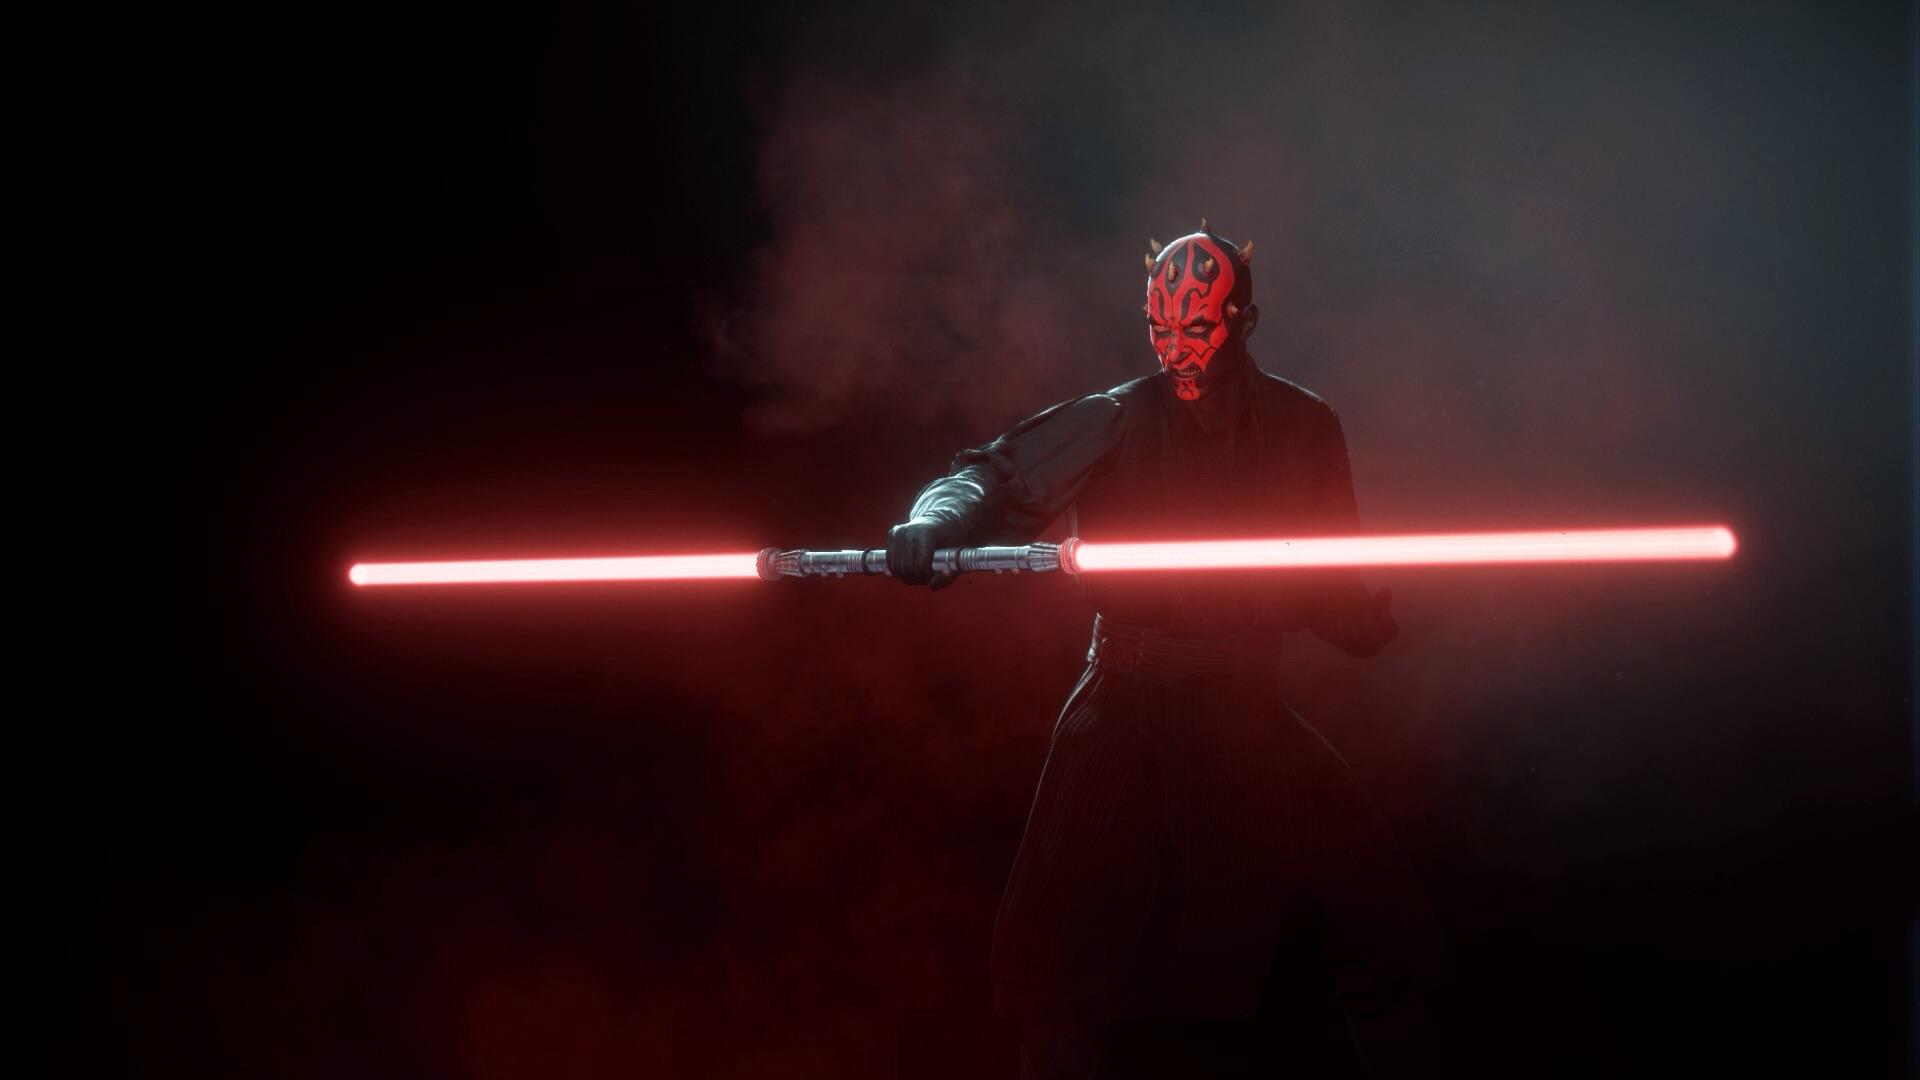 Darth Maul in inspection. This will be